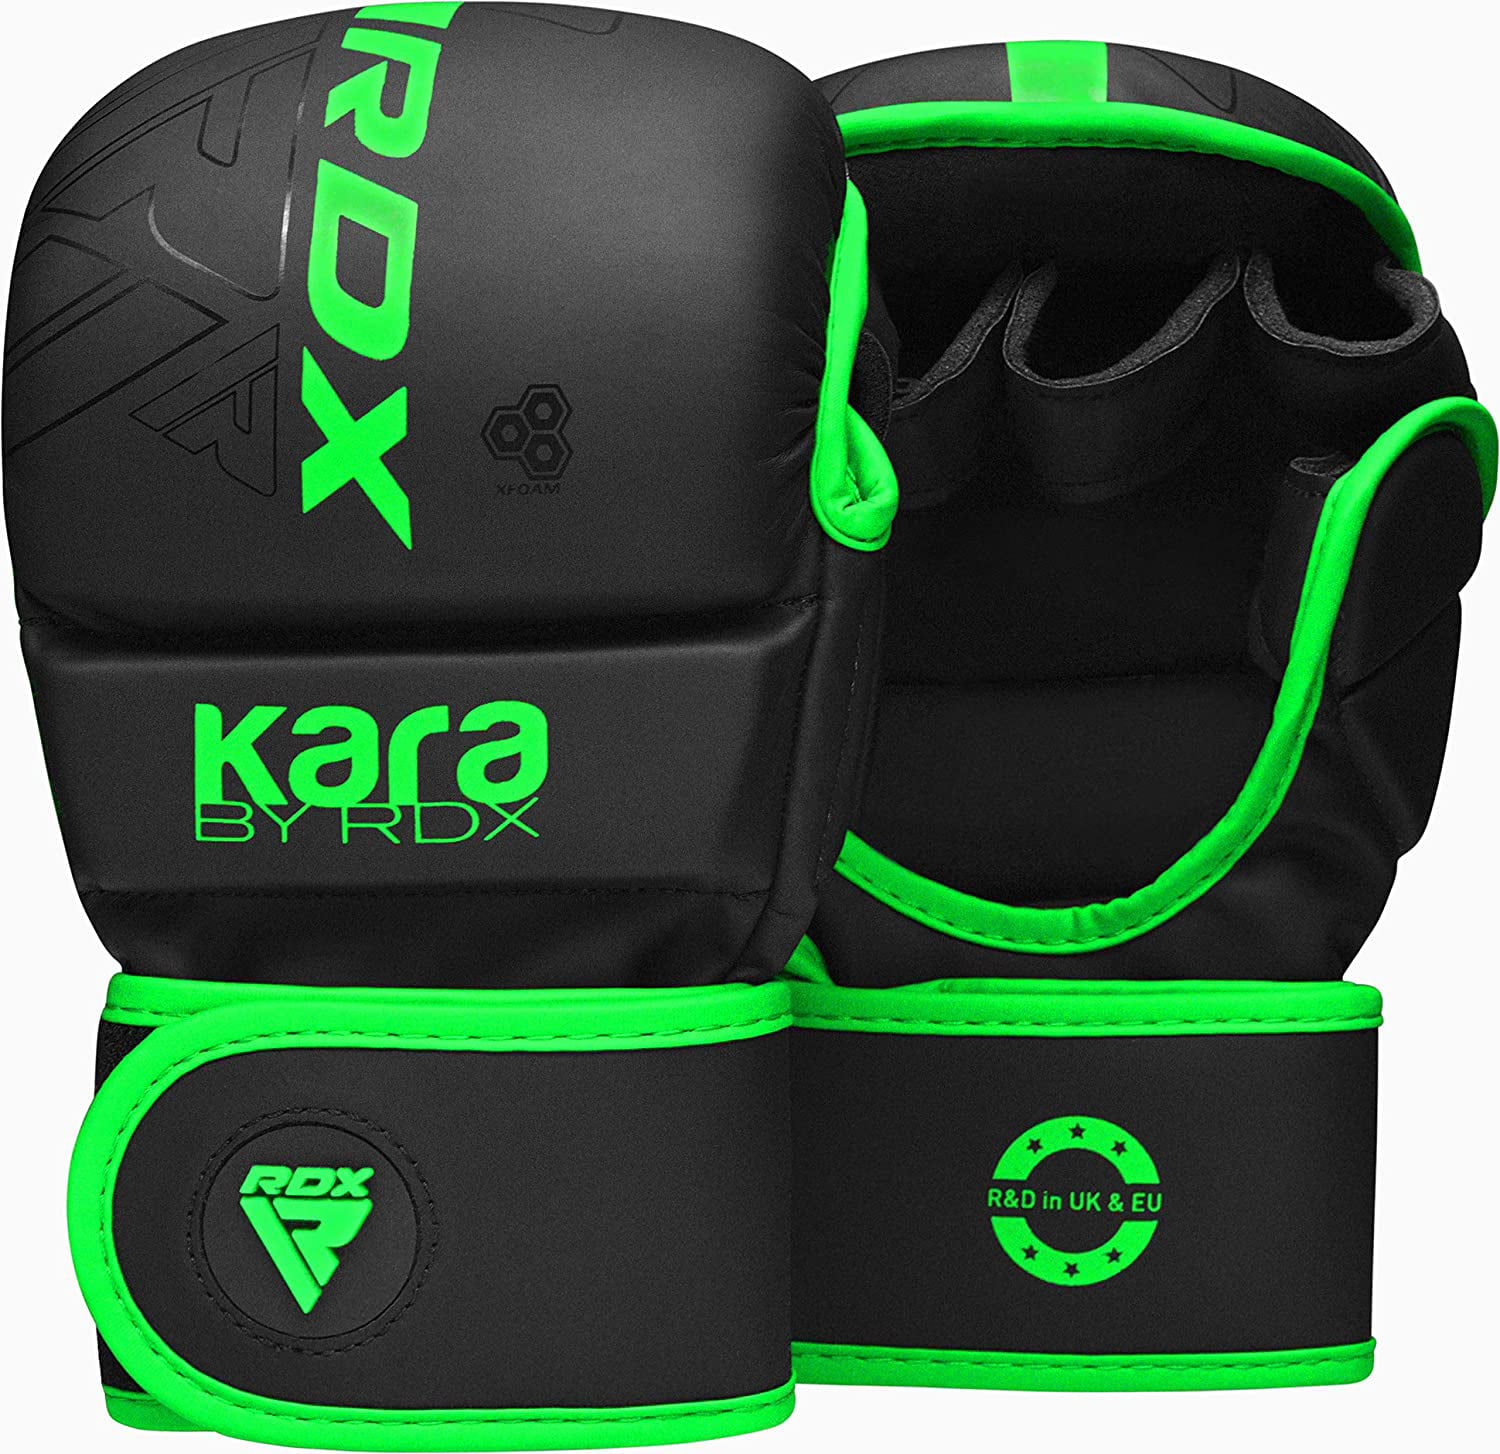 Open Palm Martial Arts Mitts Maya Hide Leather KARA Cage Gloves RDX MMA Gloves Grappling Sparring Punching Bag and Kickboxing Muay Thai Combat Sports Training